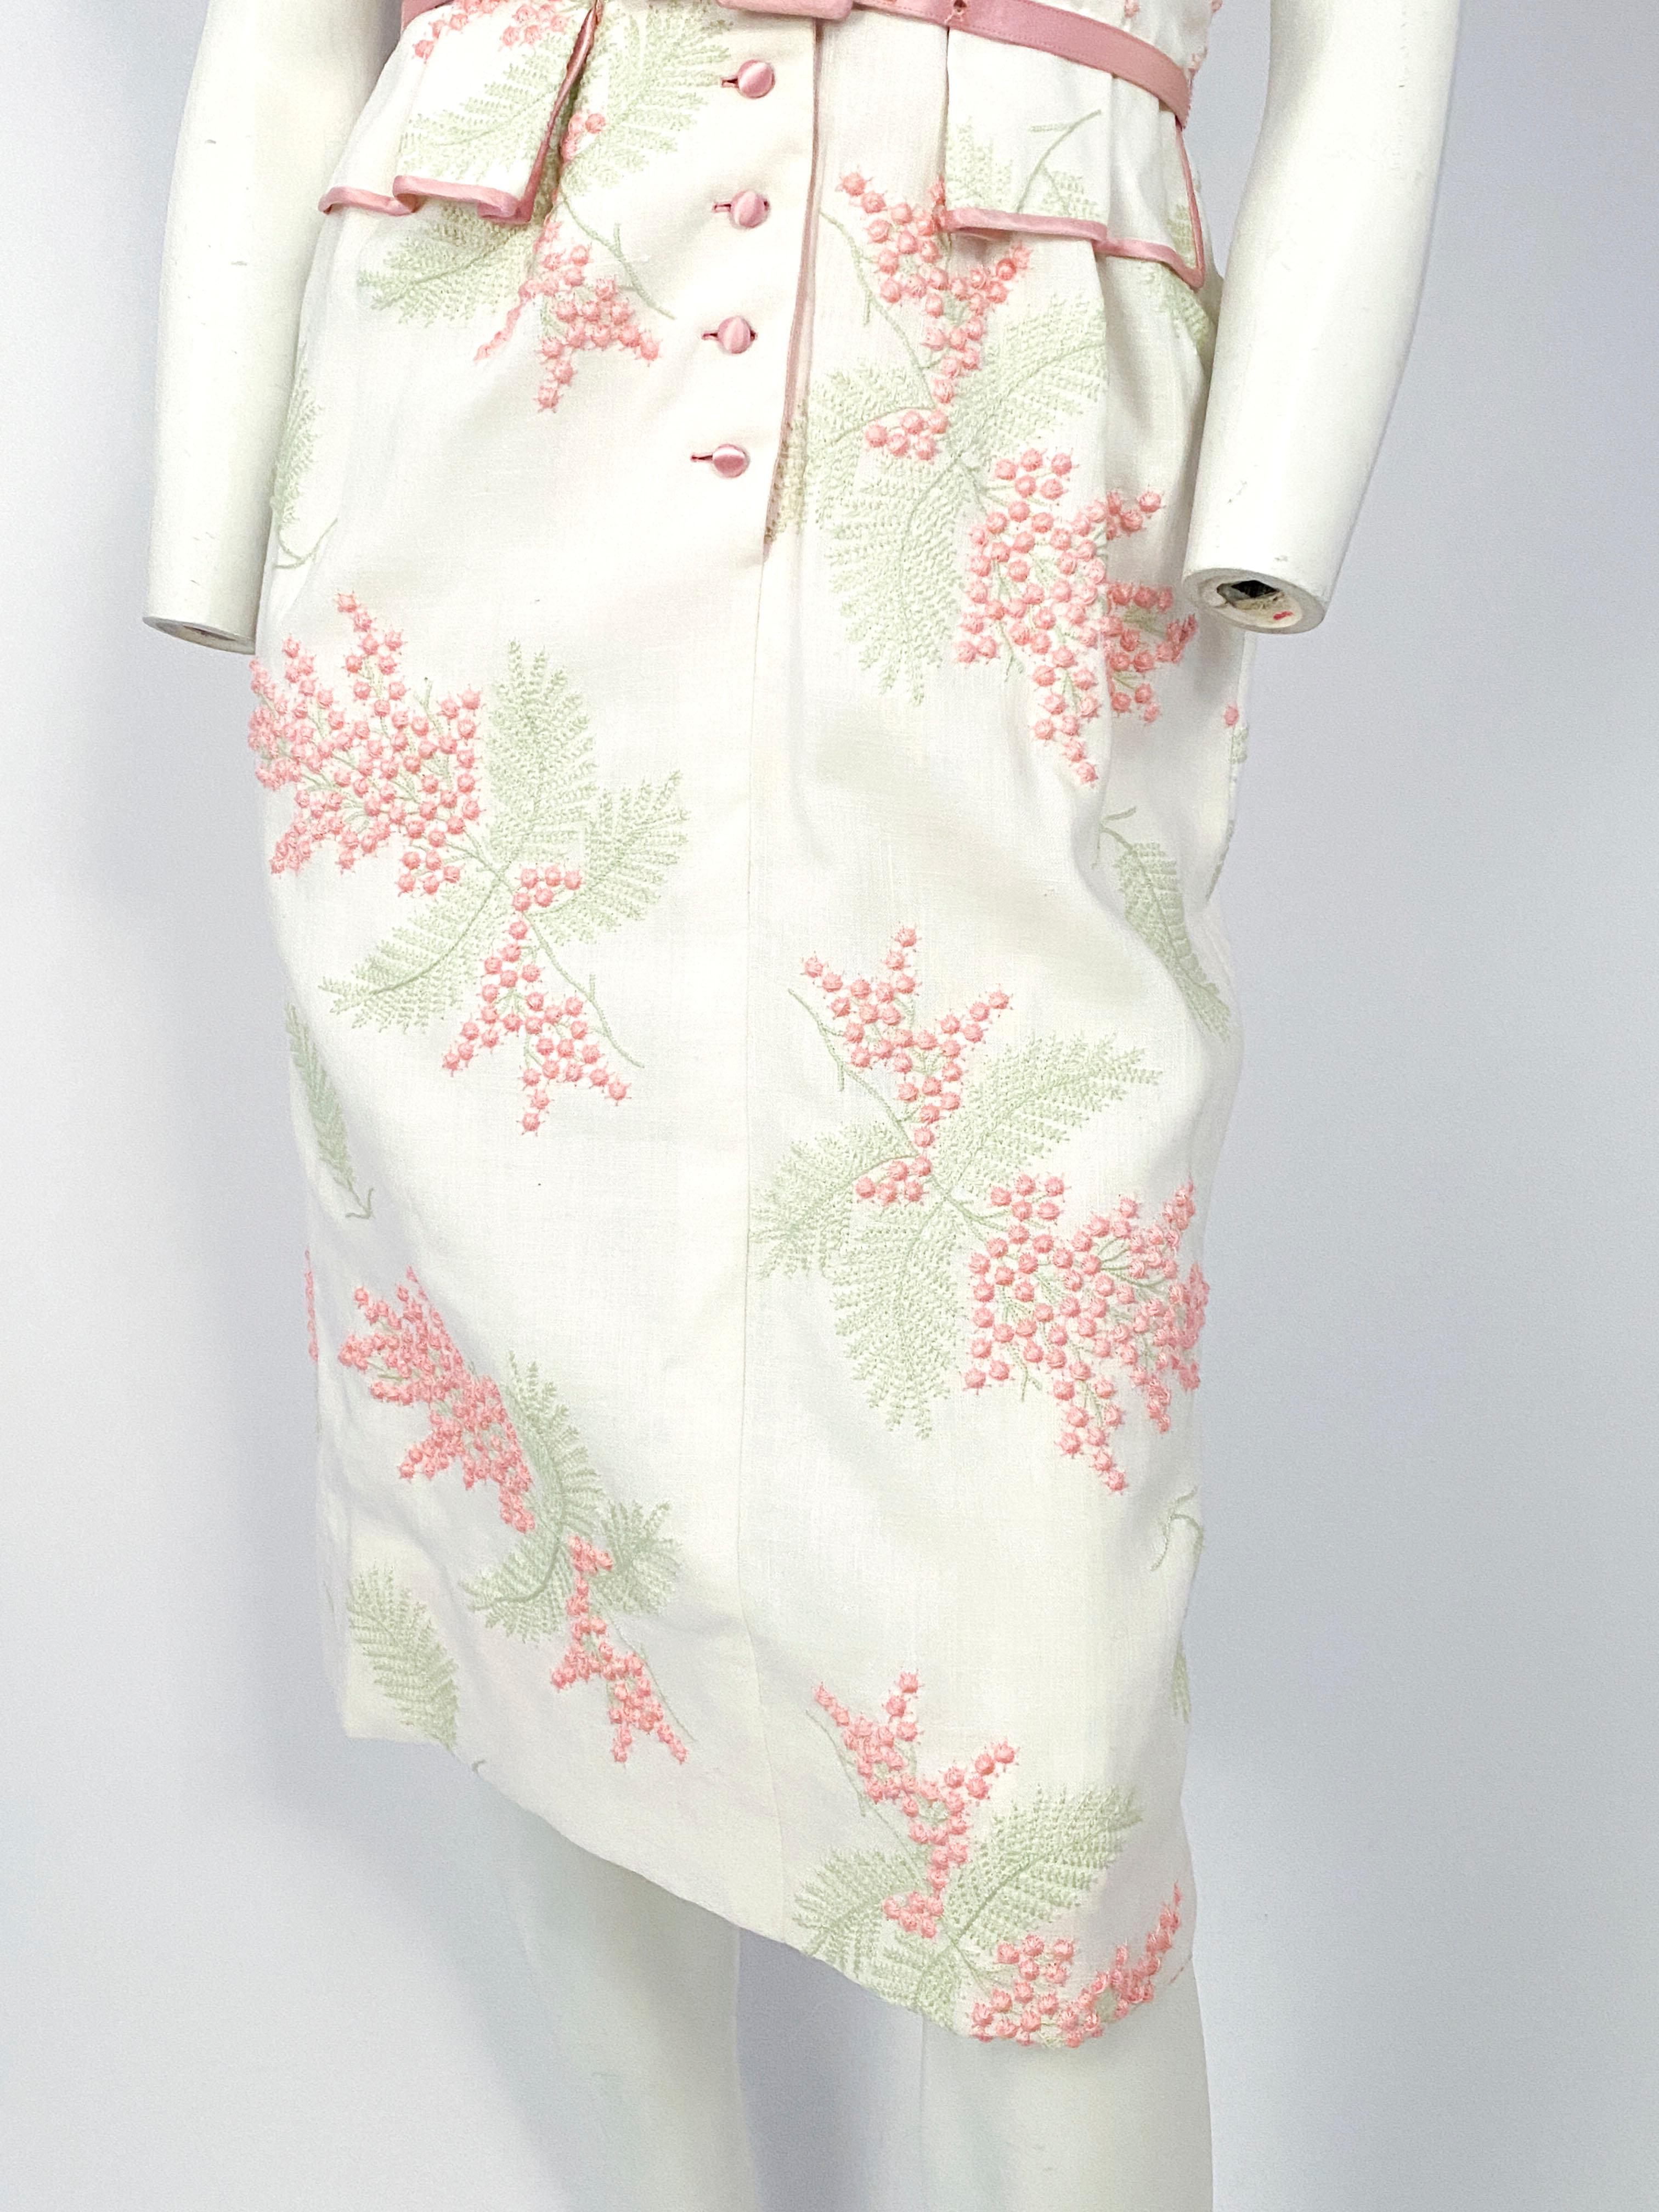 1950s white linen day dress with pink and green raised floral and foliage embroidery, satin covered buttons, piping, lapel, and matching satin belt. Short sleeves are finished with a wide cuff and waist is cinched with faux pocket covers.